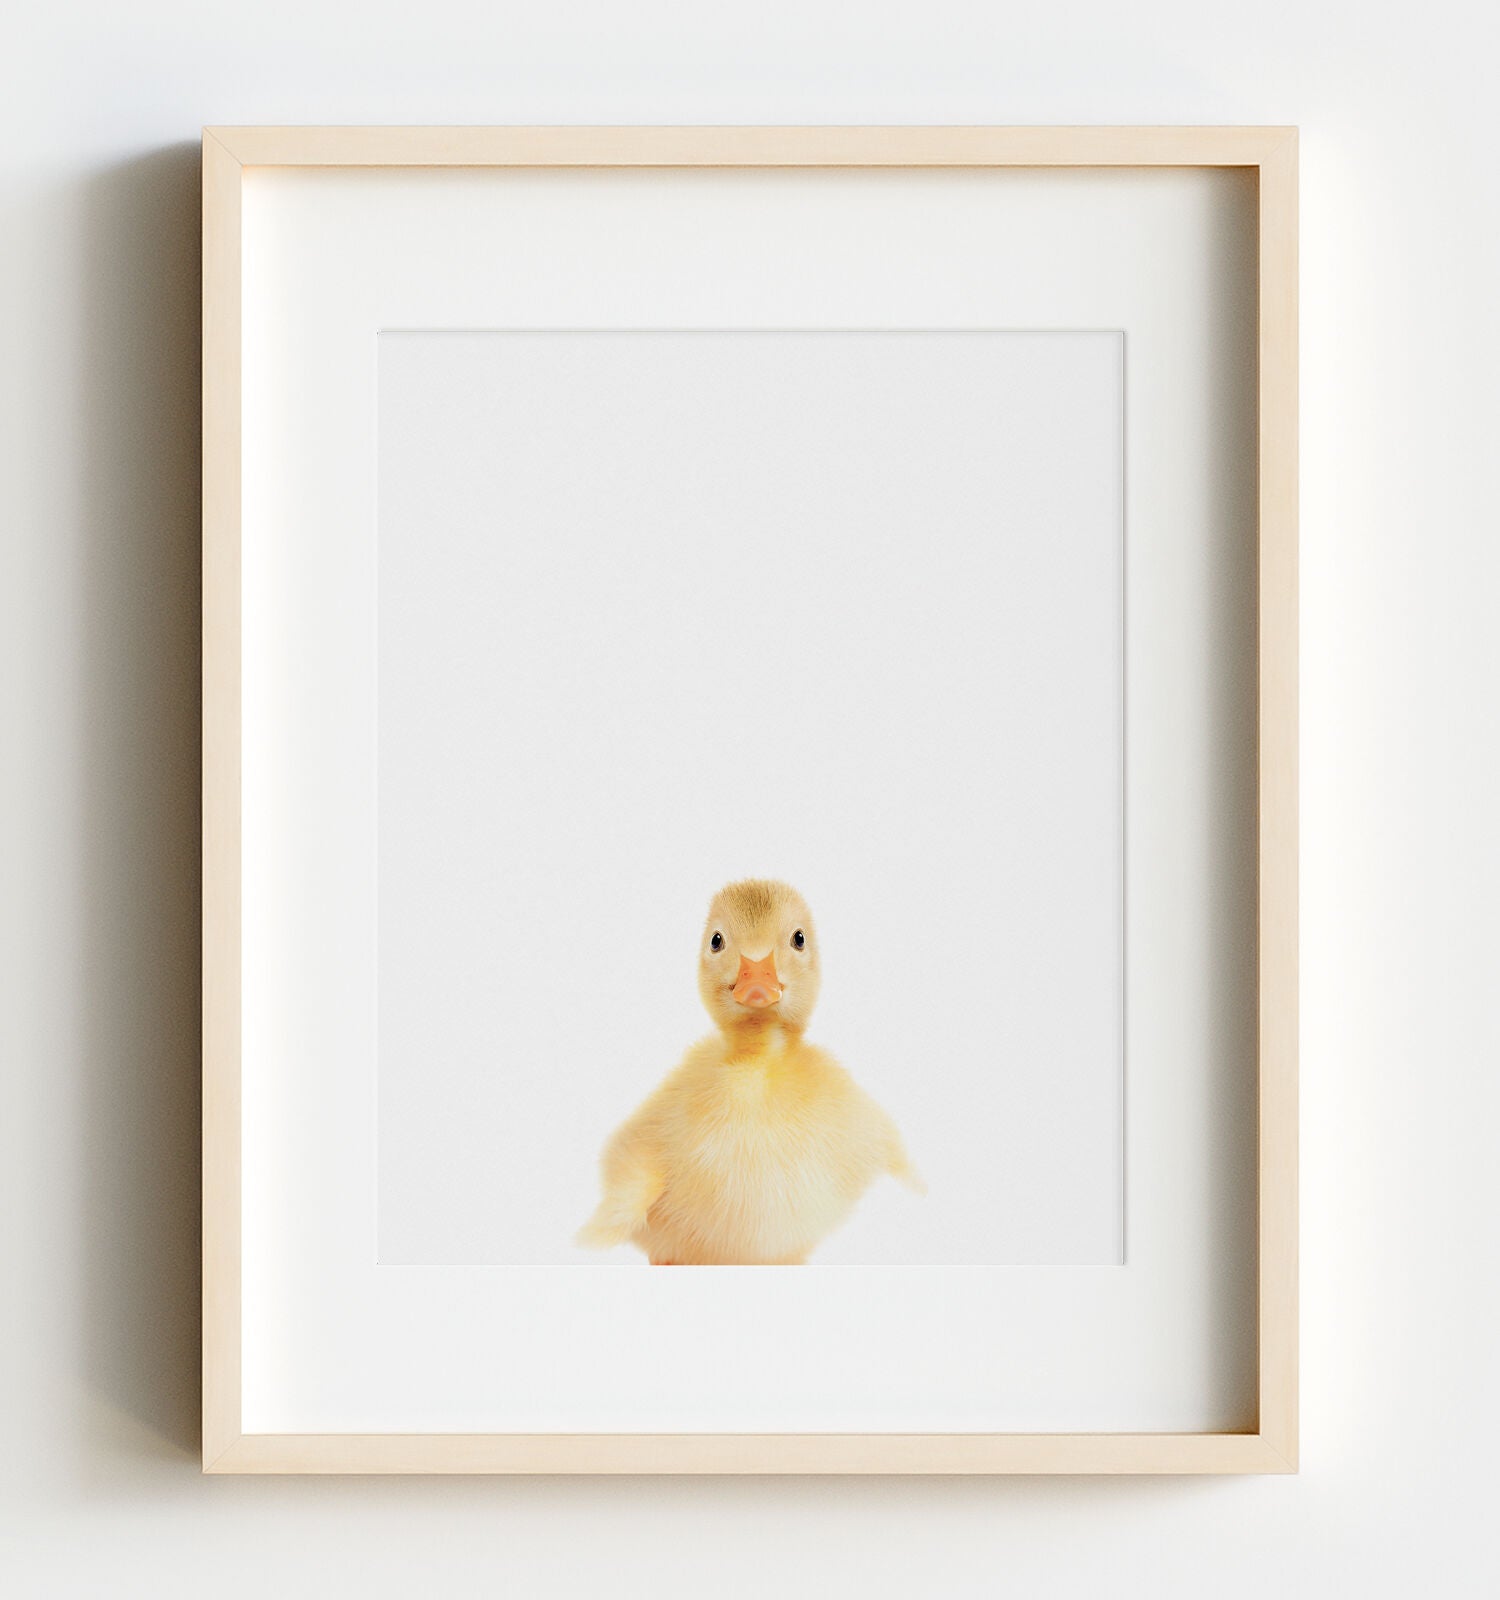 Baby Duckling - The Crown Prints